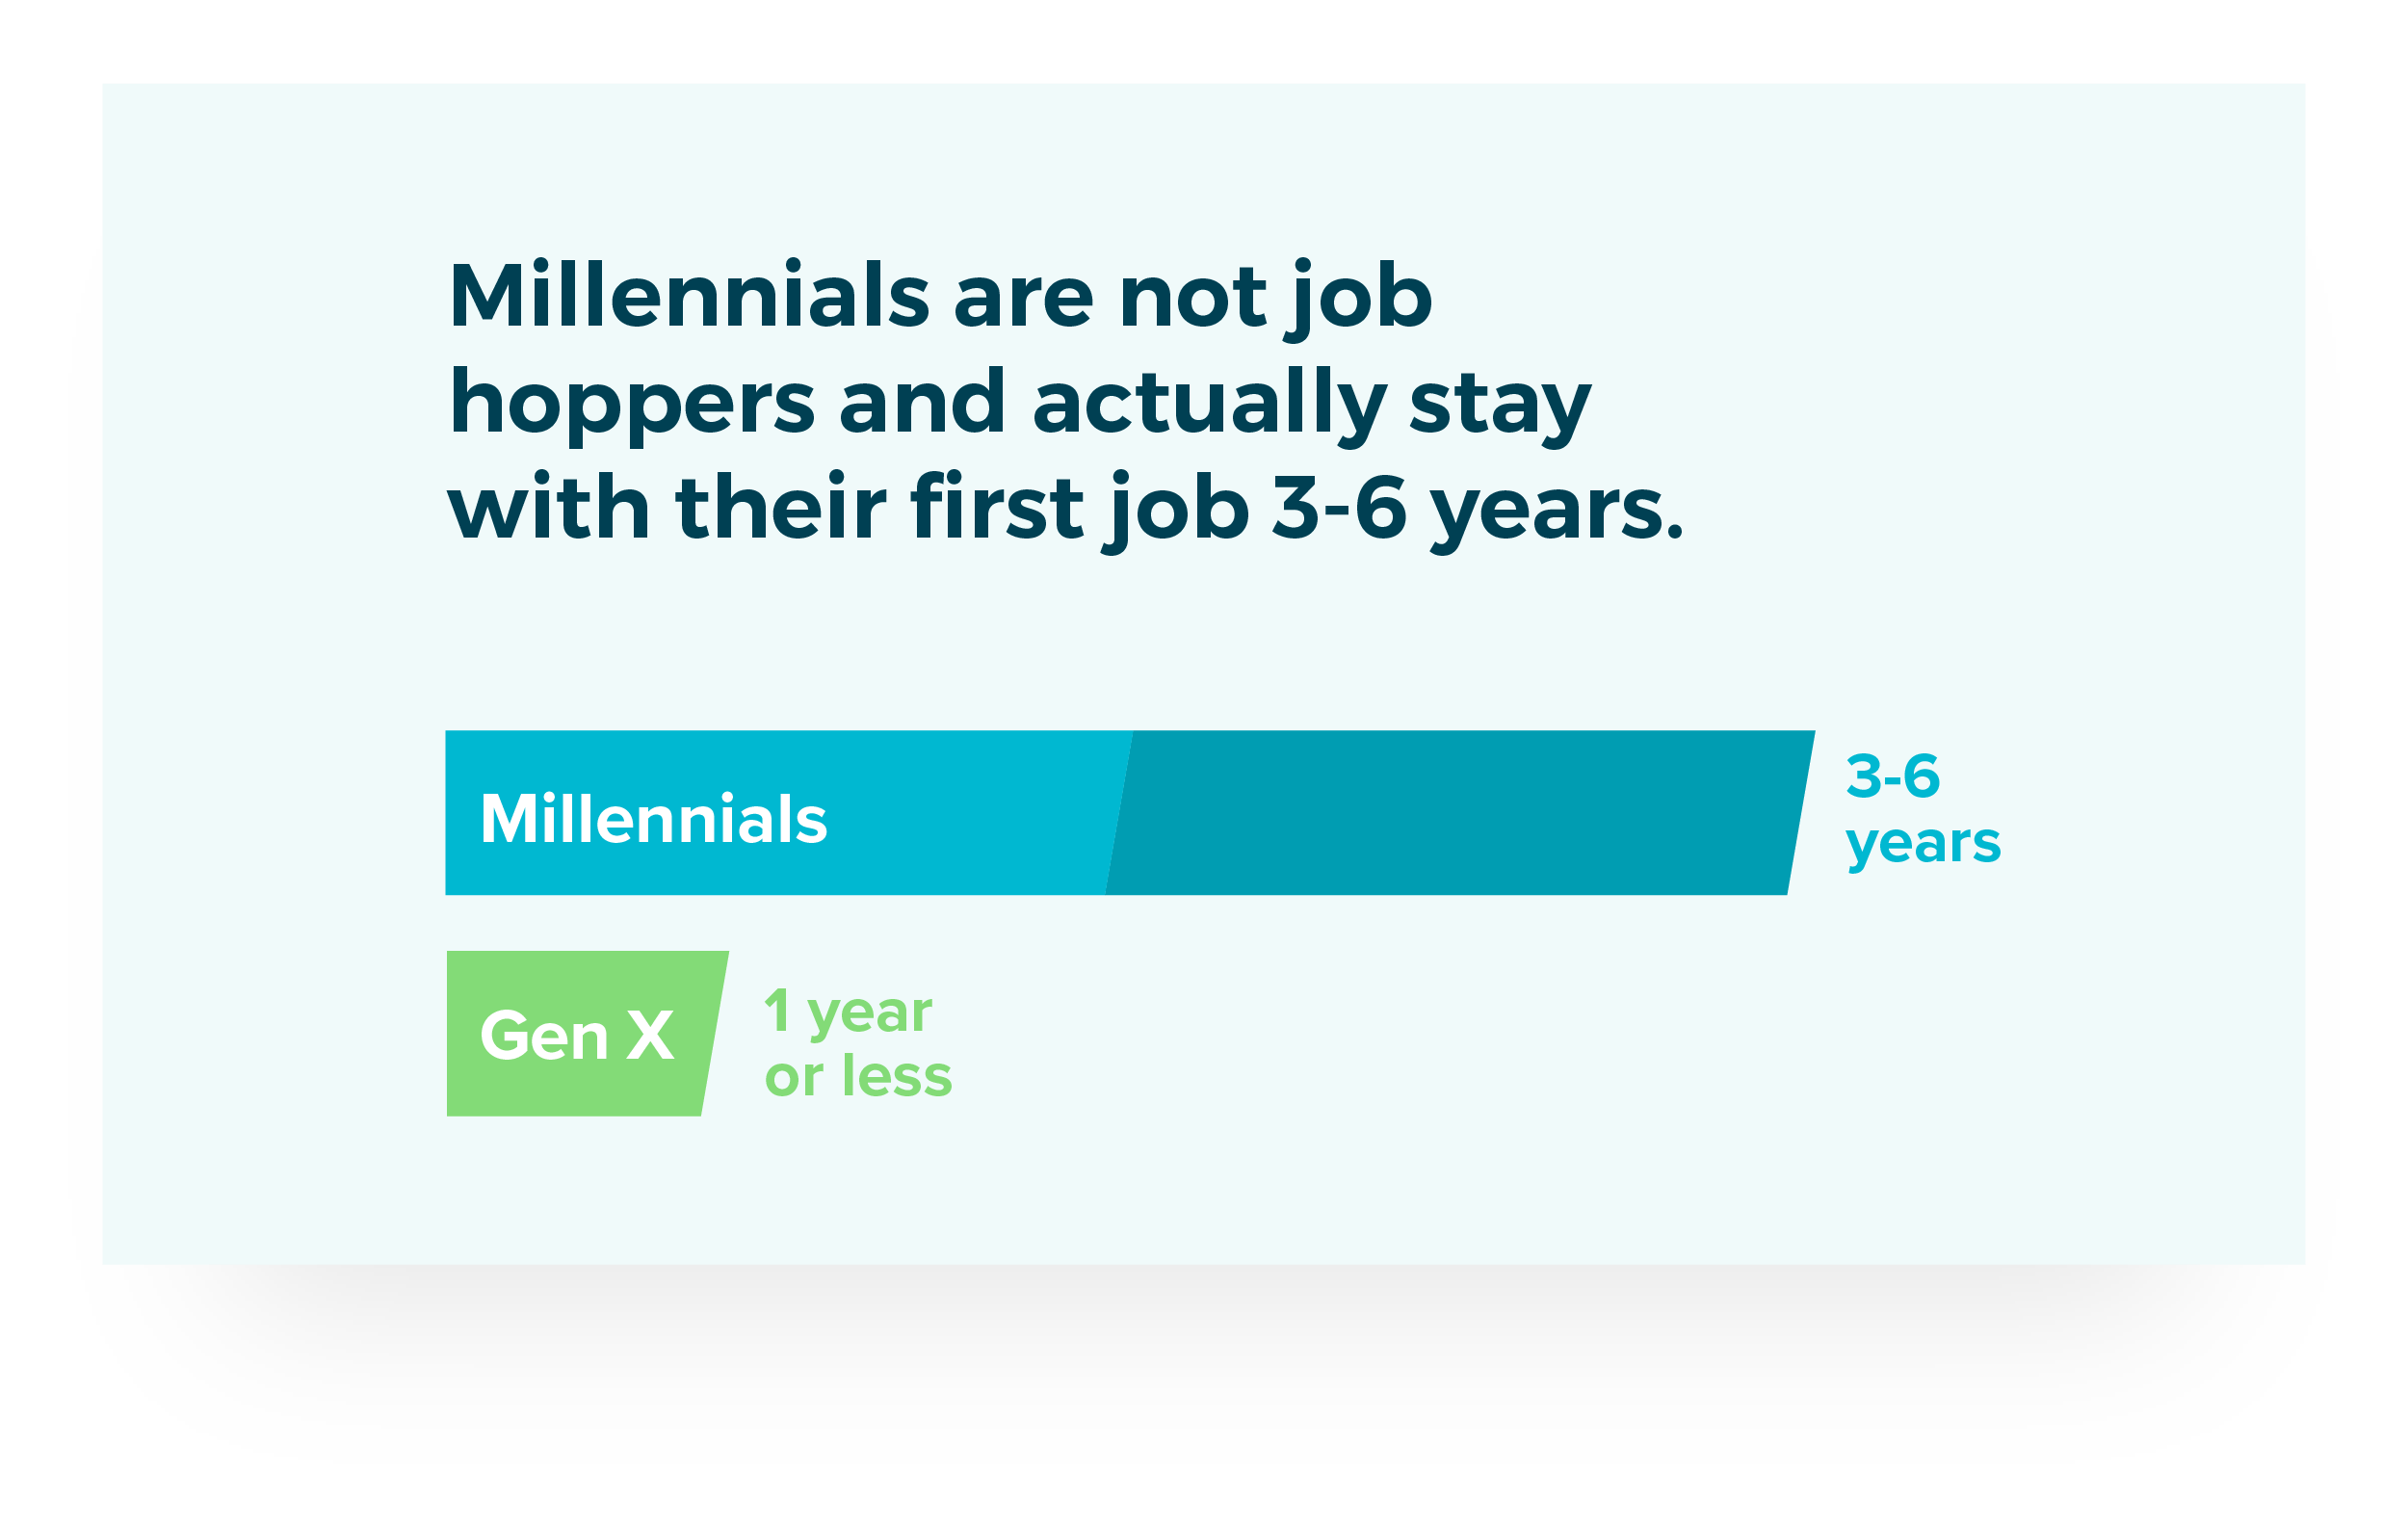 Millennials are not job hoppers and actually stay with their first job 3-6 years vs. Gen X at 1 year or less